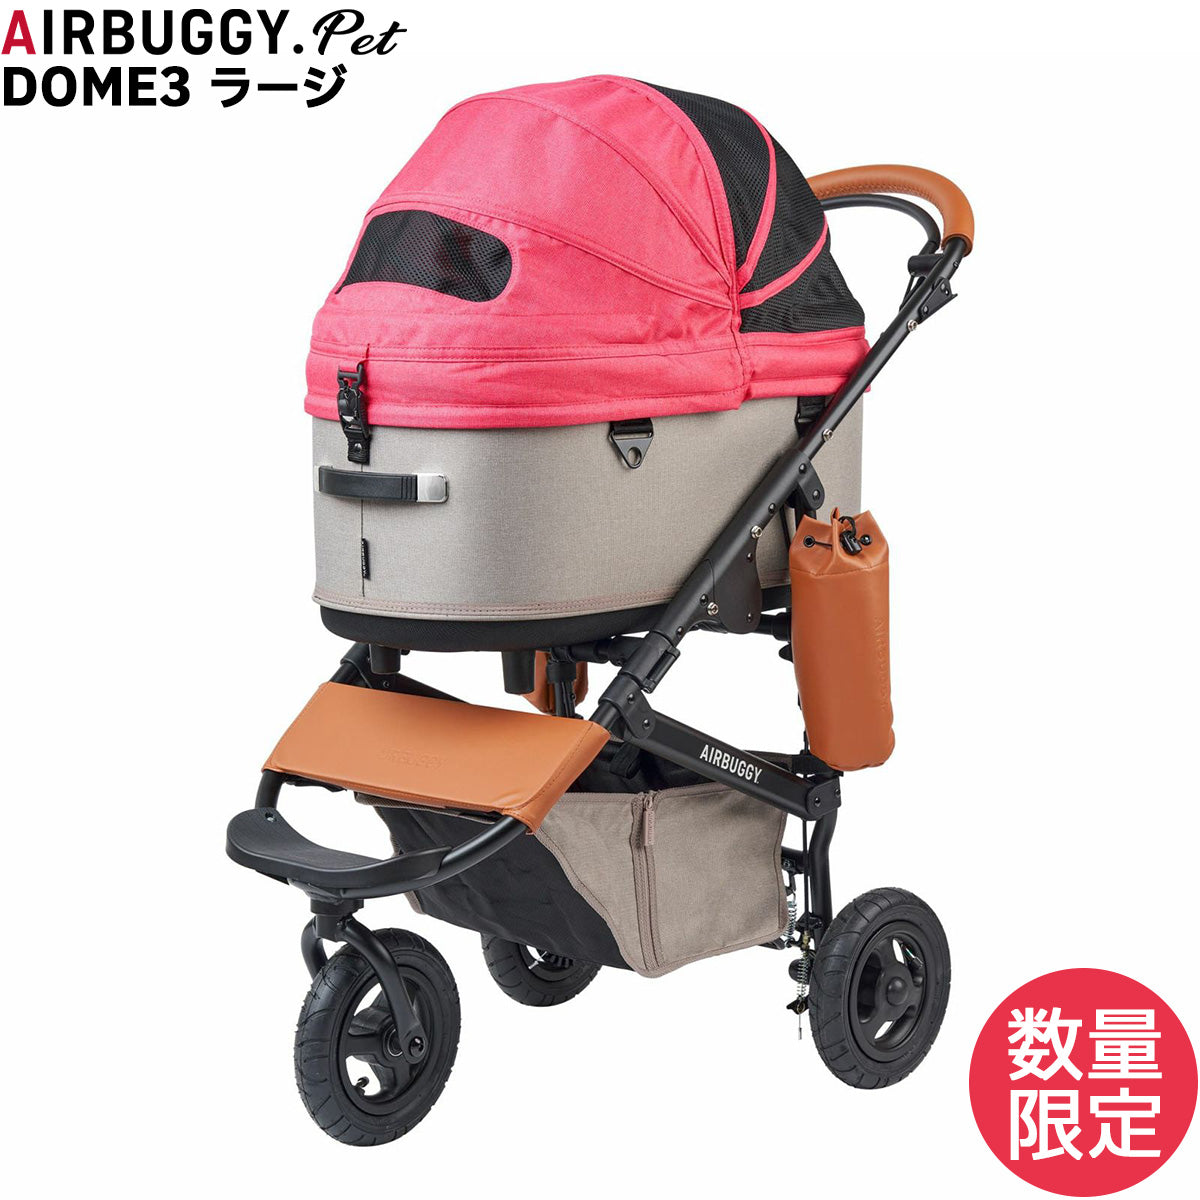 AirBuggy for Pet(エアバギーフォーペット)本体重量9400g